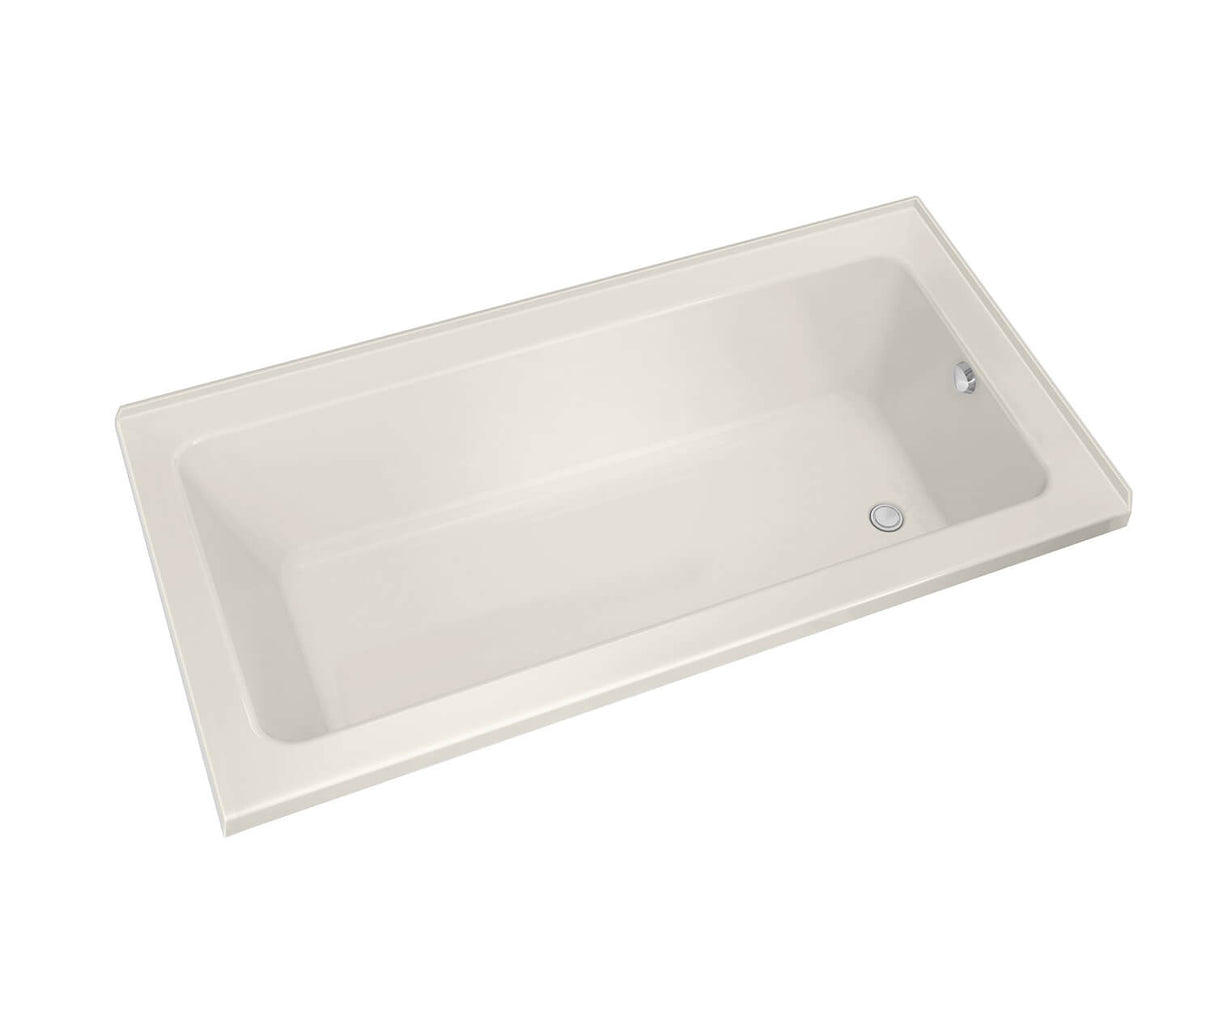 MAAX 106209-R-003-007 Pose 6636 IF Acrylic Corner Right Right-Hand Drain Whirlpool Bathtub in Biscuit